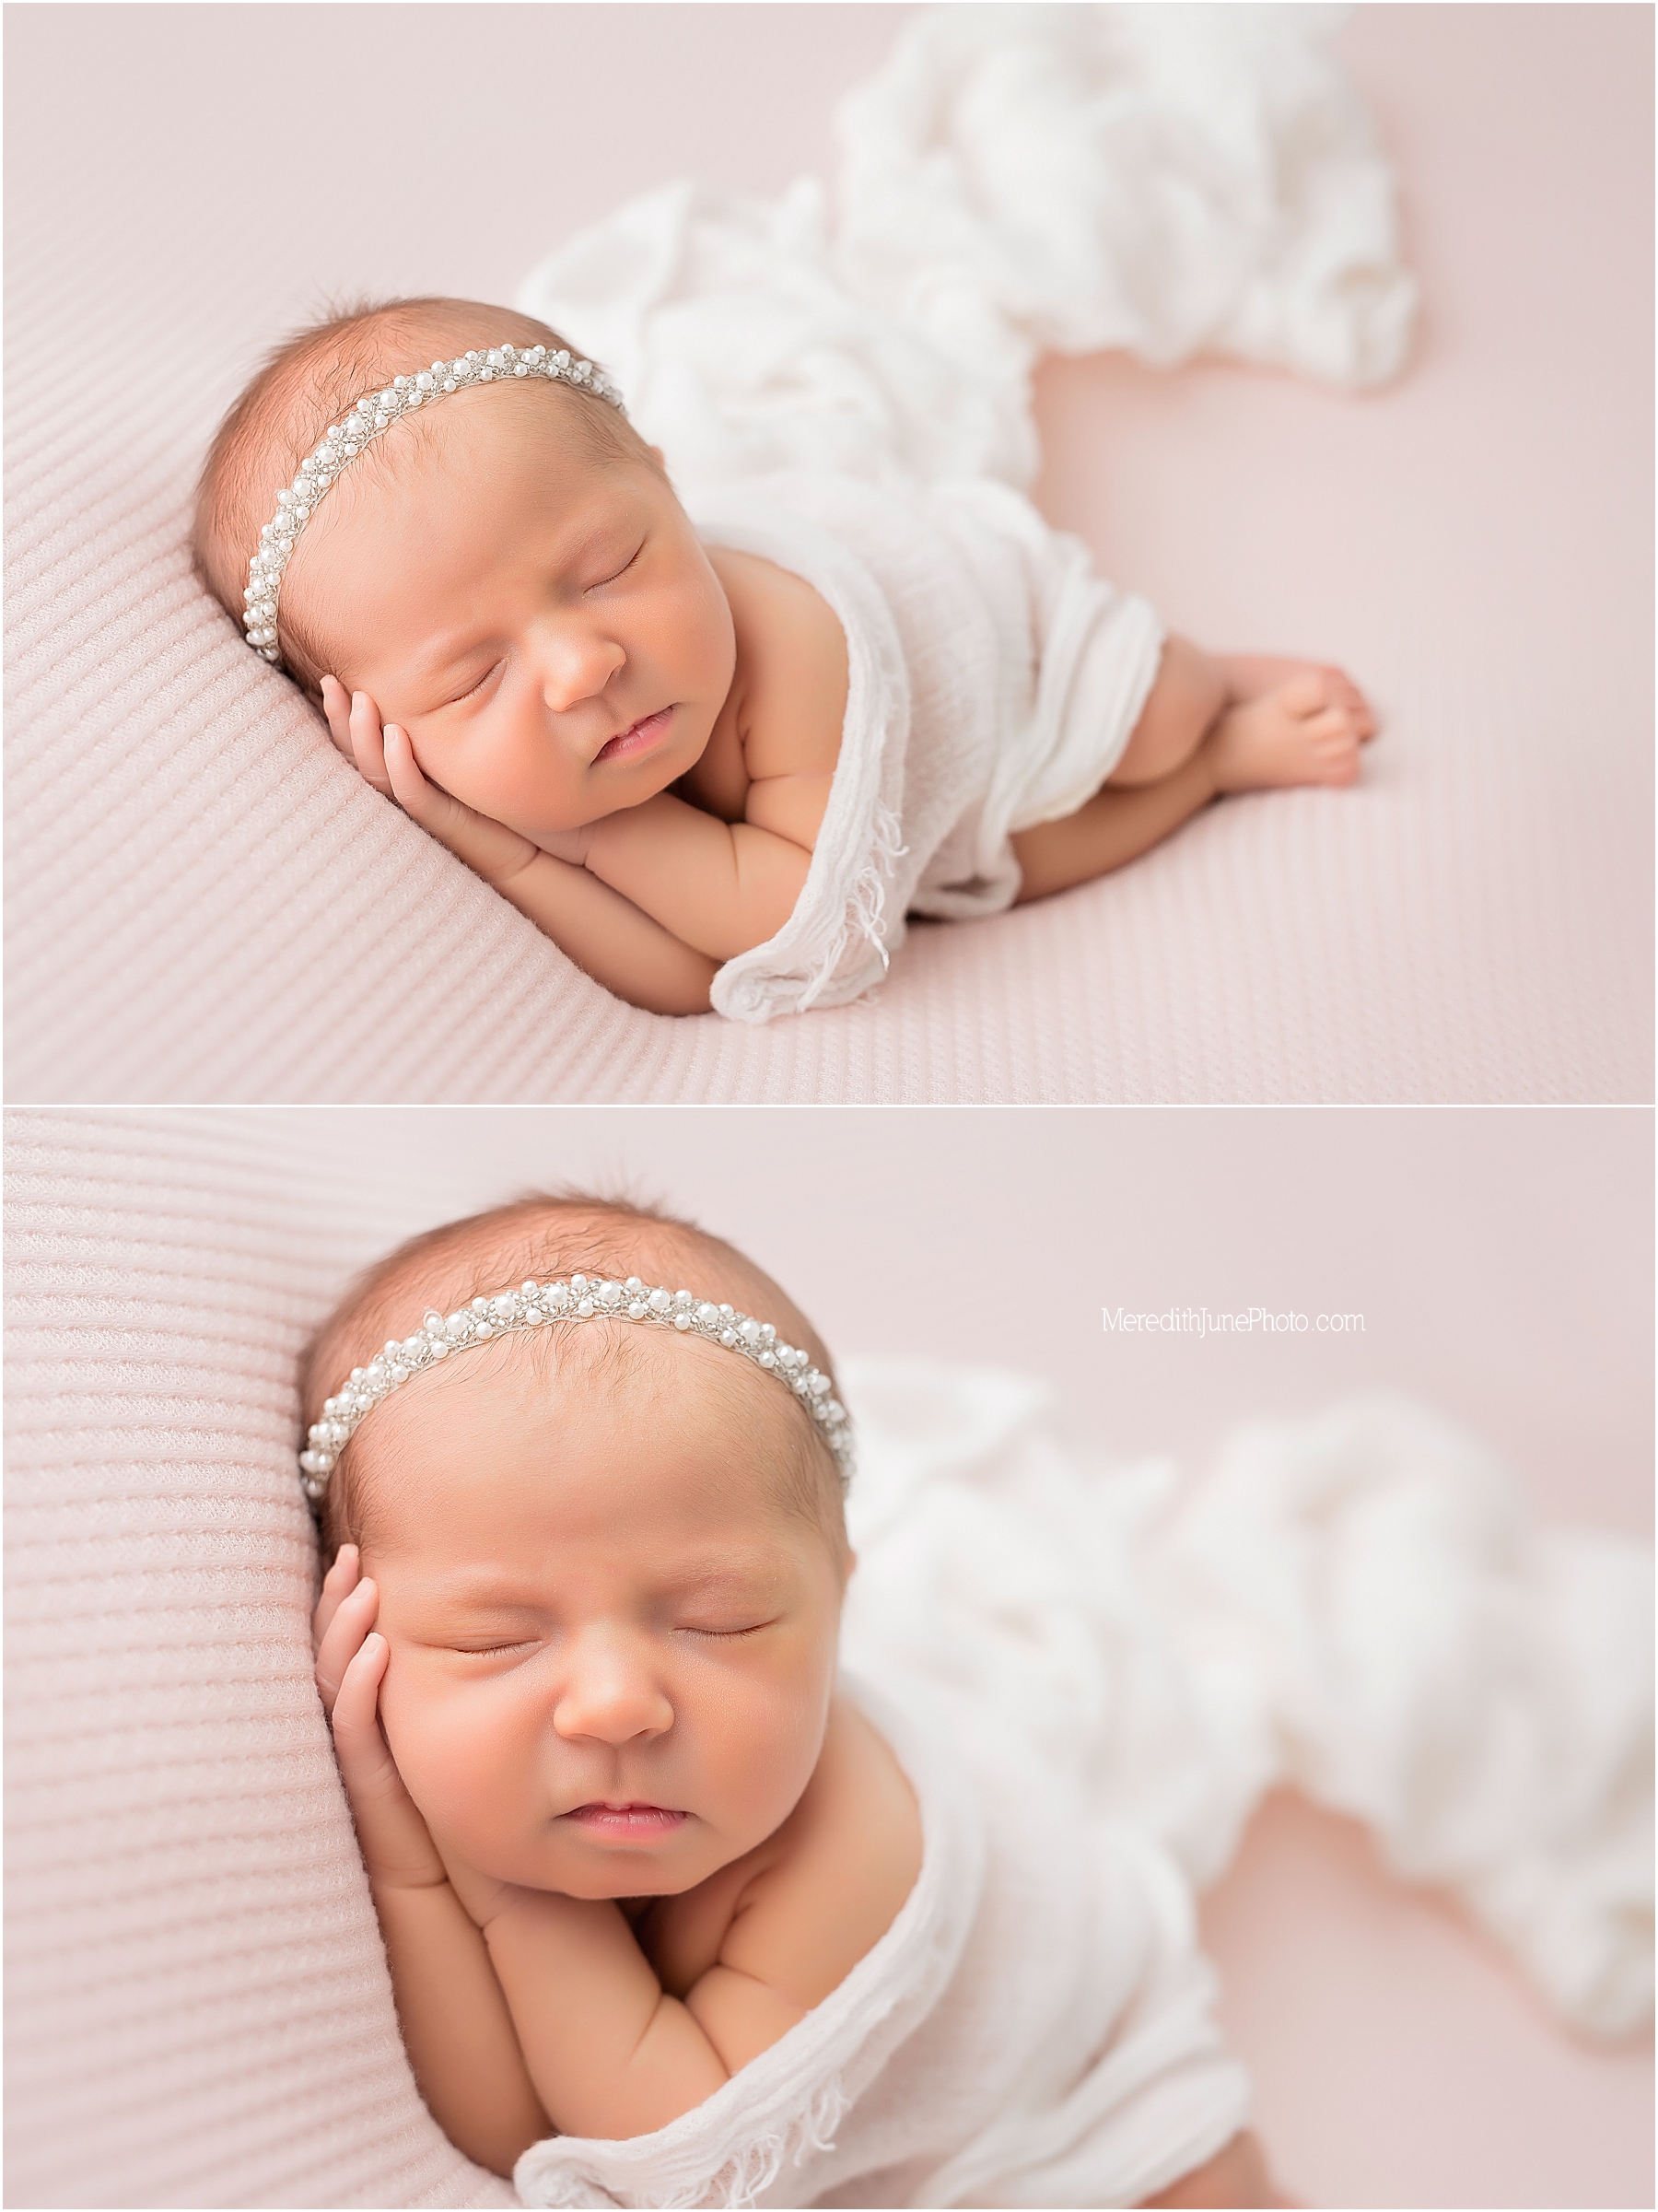 Olive's newborn session at Meredith June Photography 